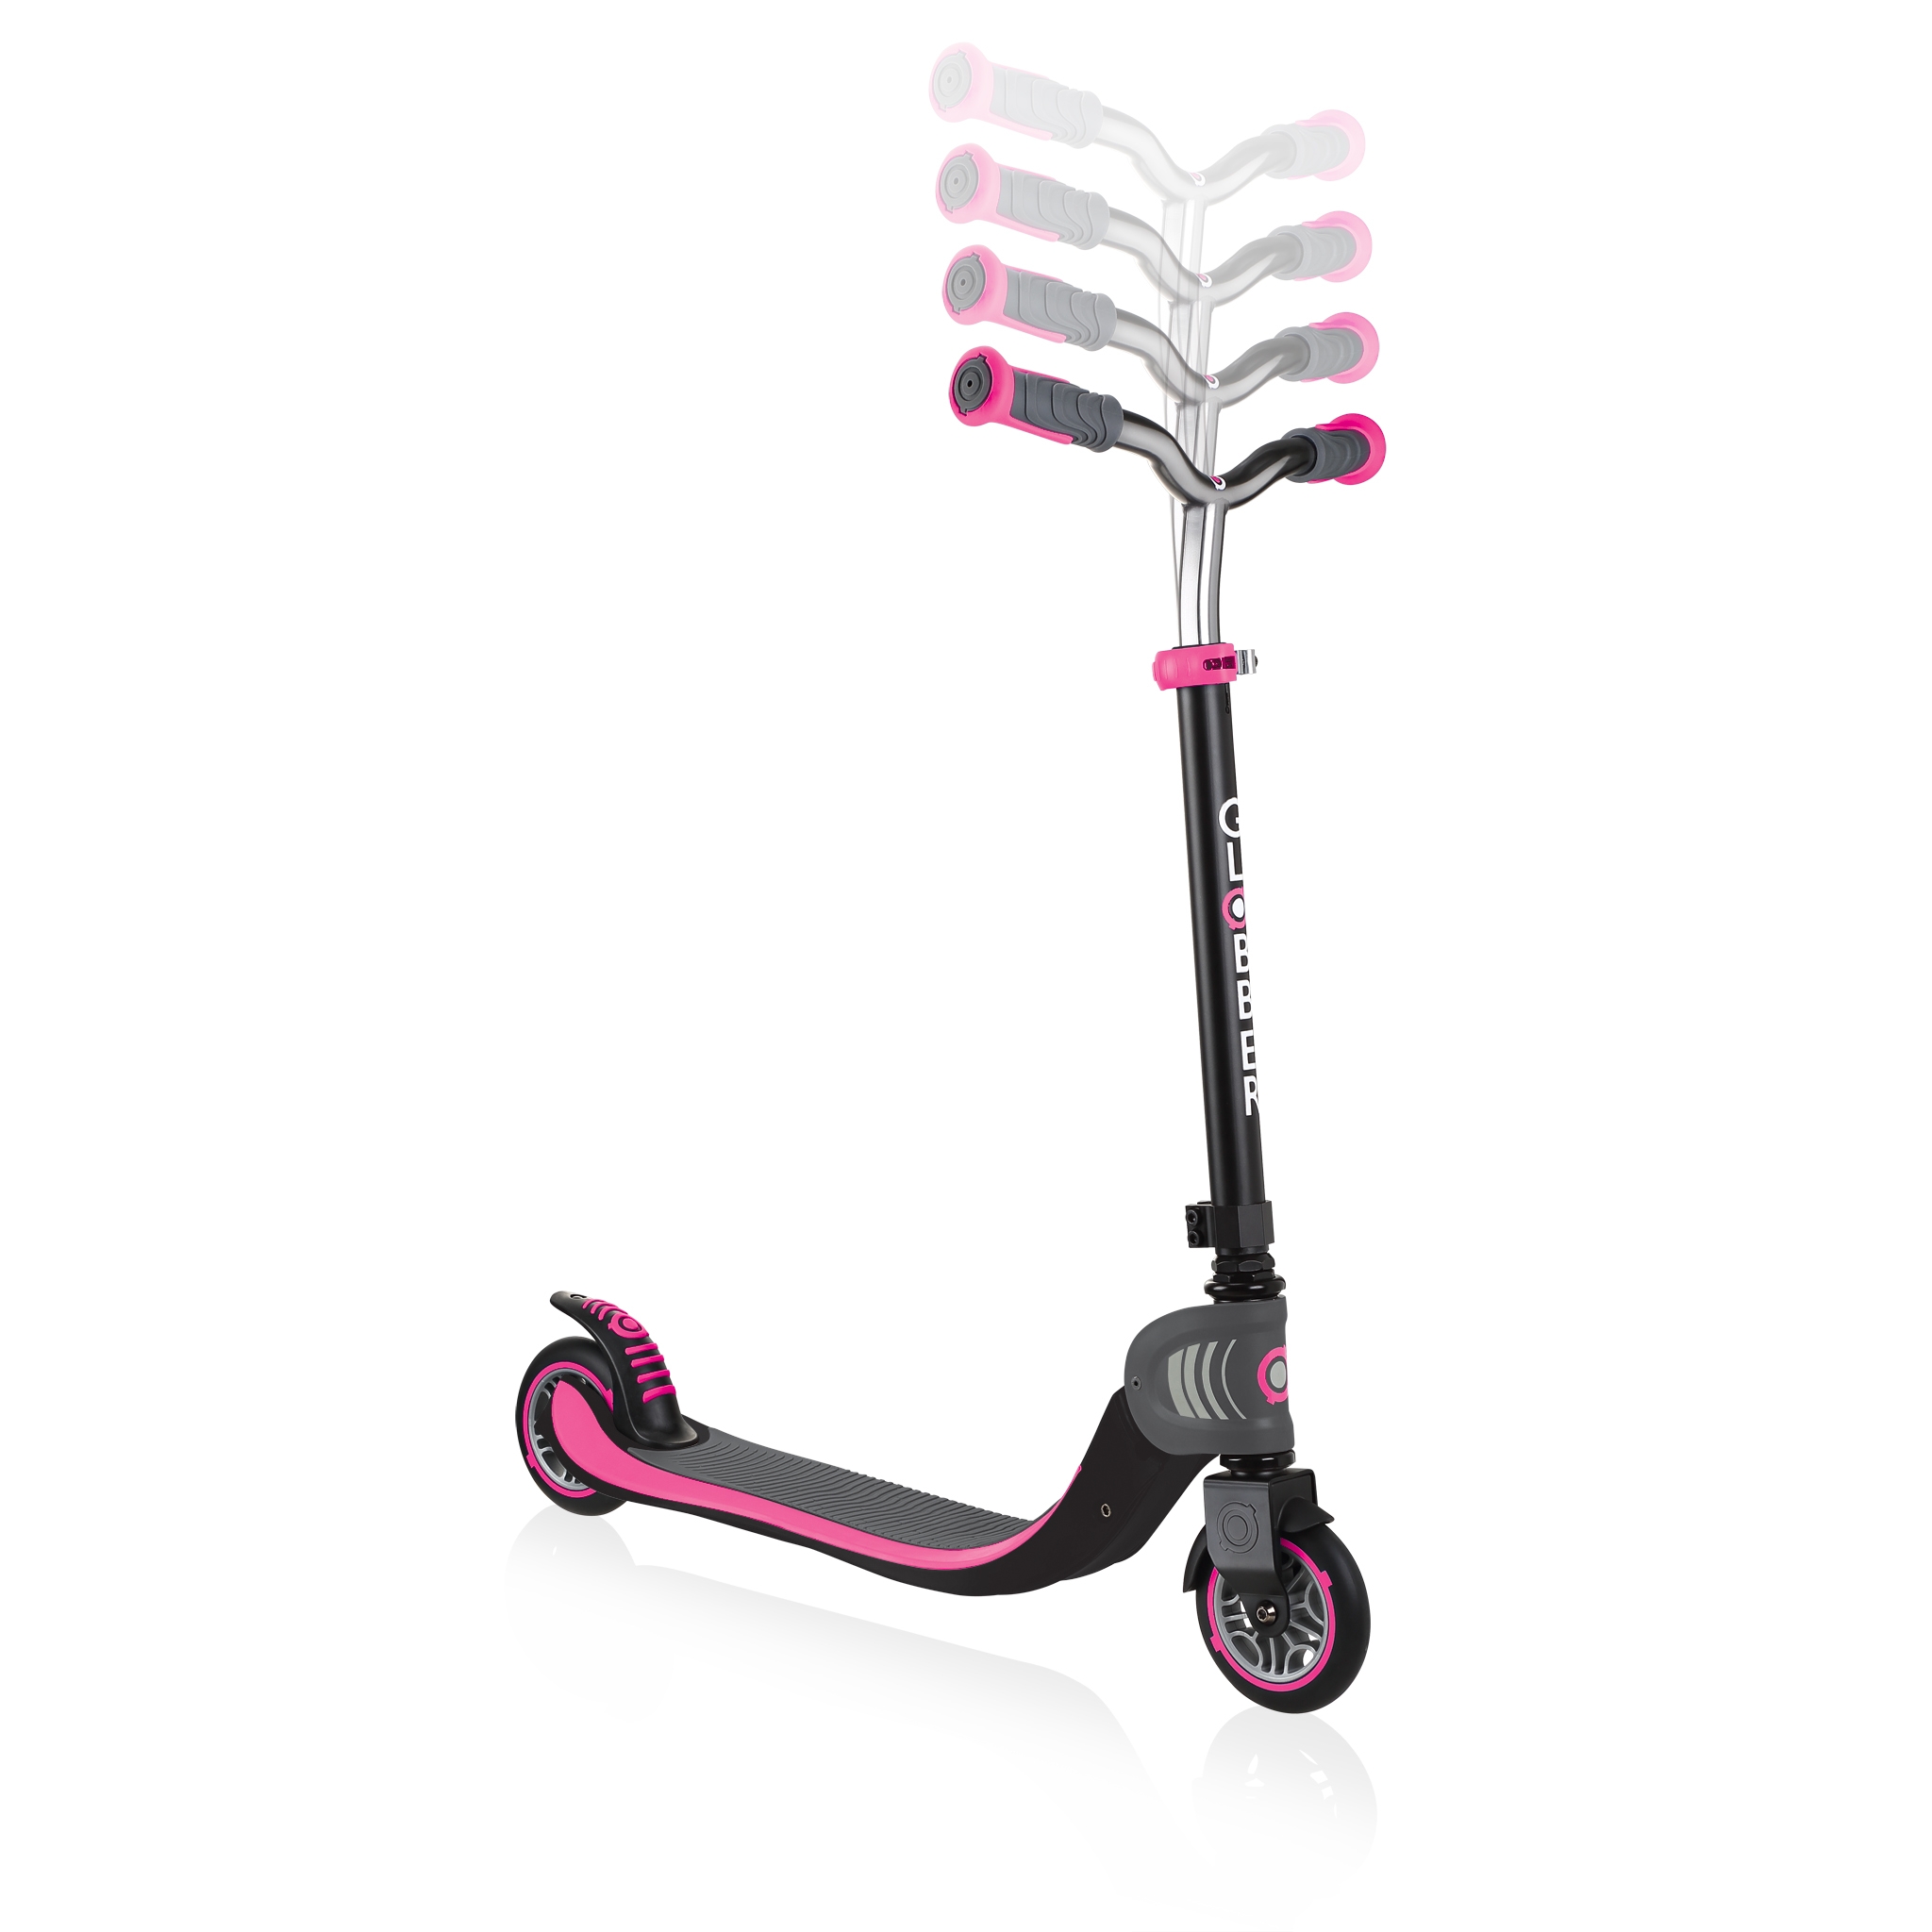 FLOW-FOLDABLE-125-2-wheel-scooter-for-kids-with-adjustable-t-bar-deep-pink 2